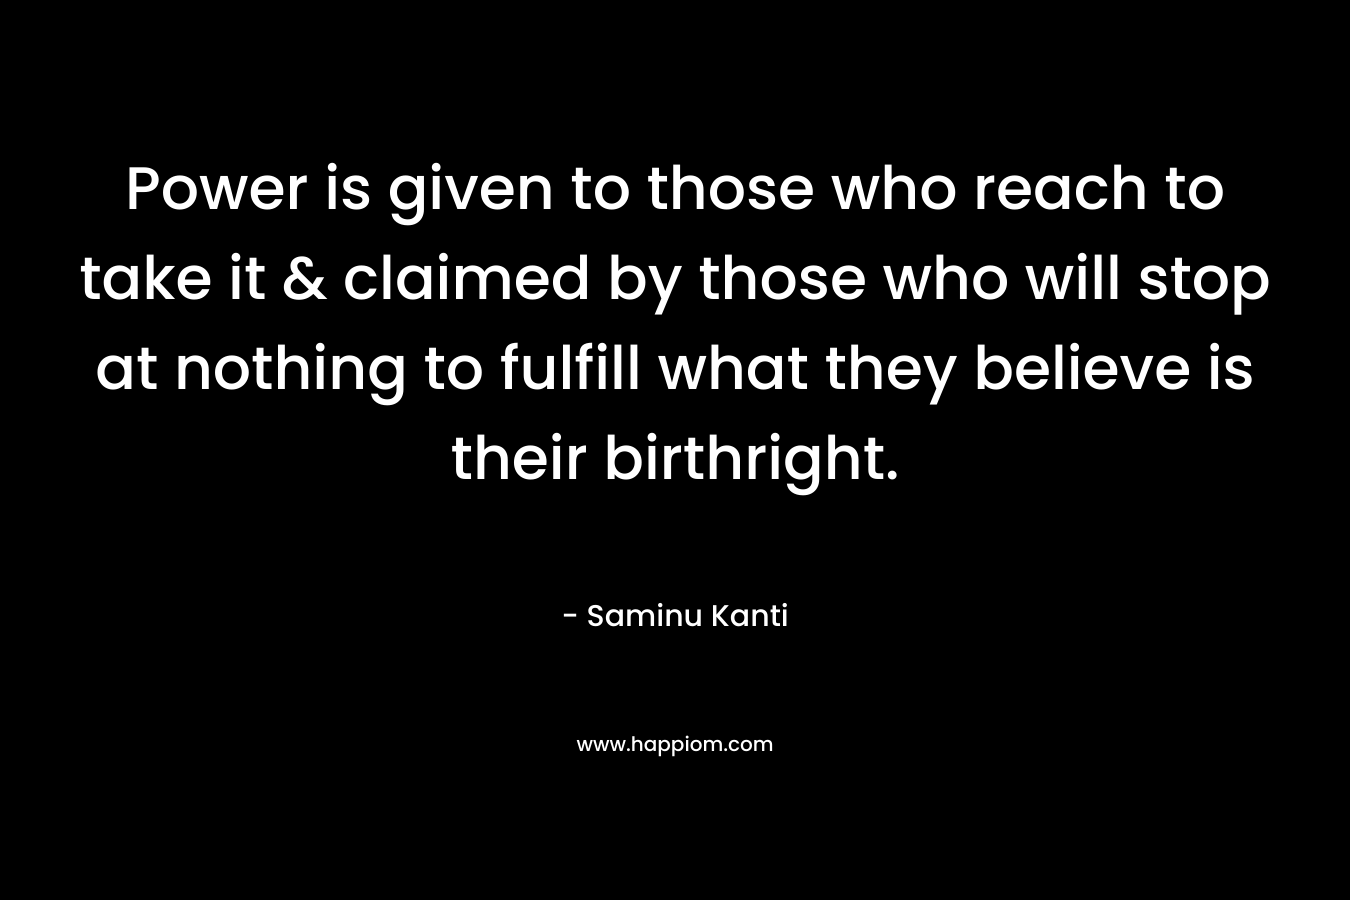 Power is given to those who reach to take it & claimed by those who will stop at nothing to fulfill what they believe is their birthright.